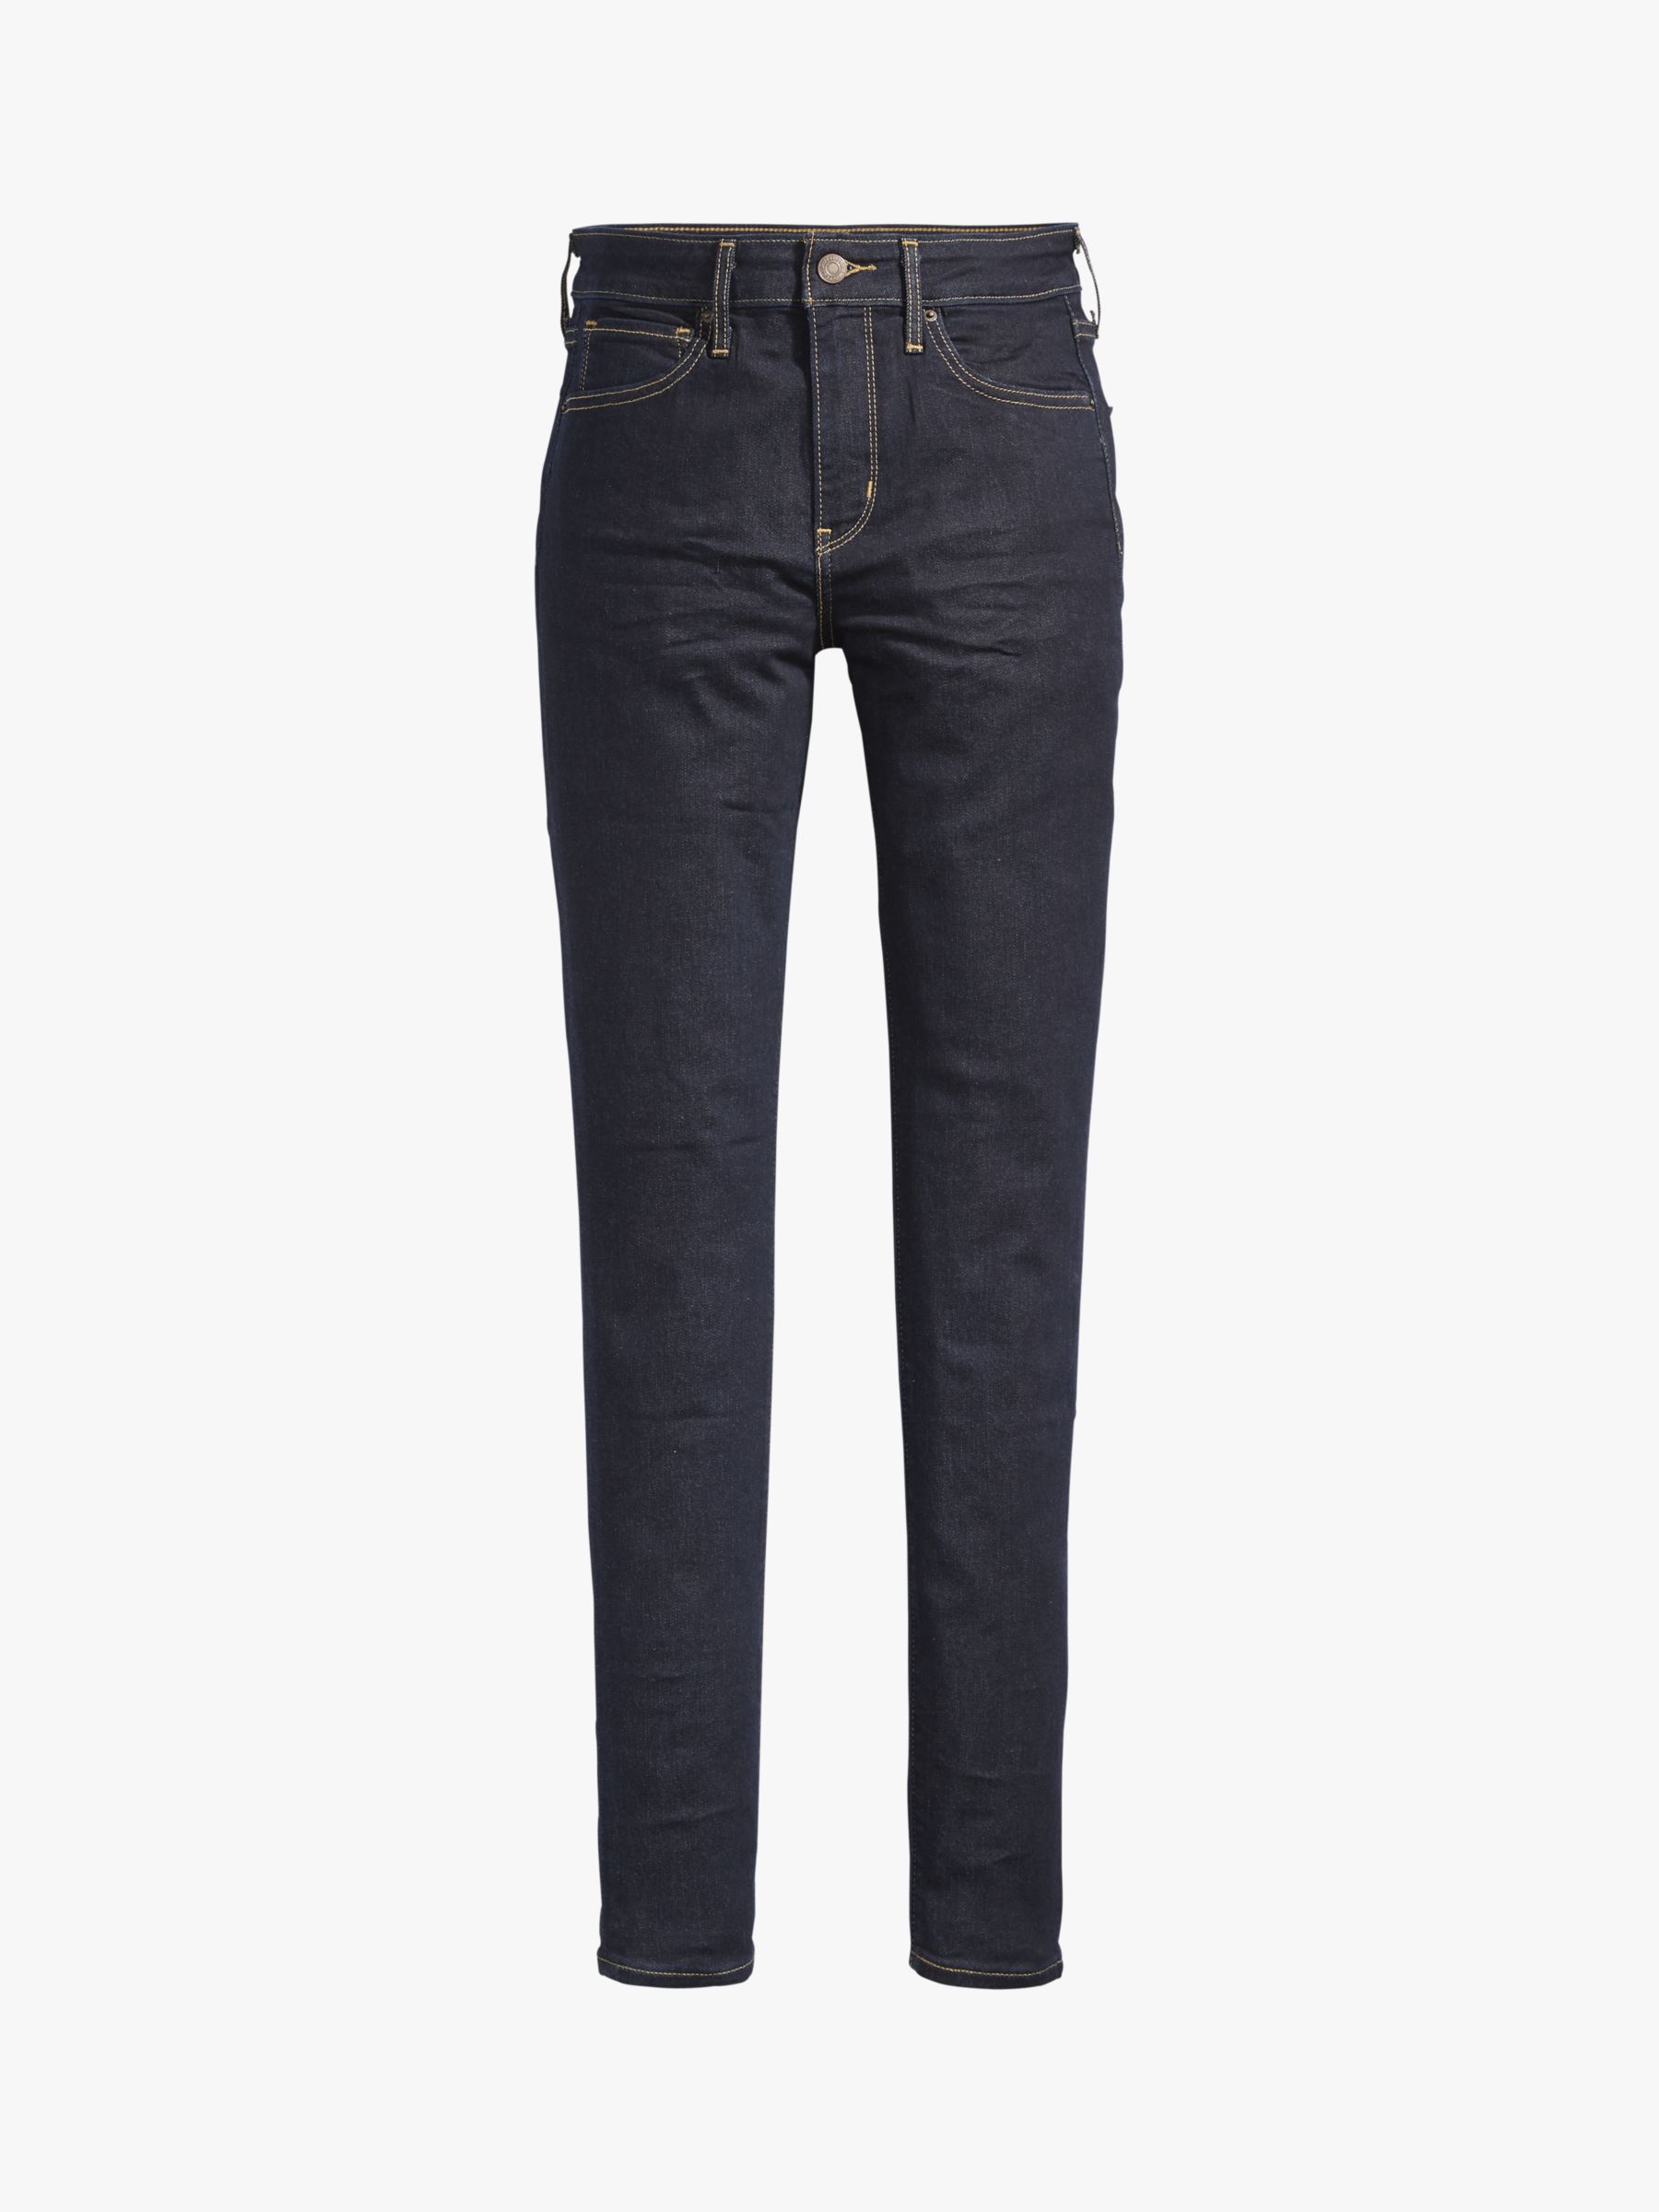 Levi's 721 High Rise Skinny Jeans, To The Nine, W27/L34